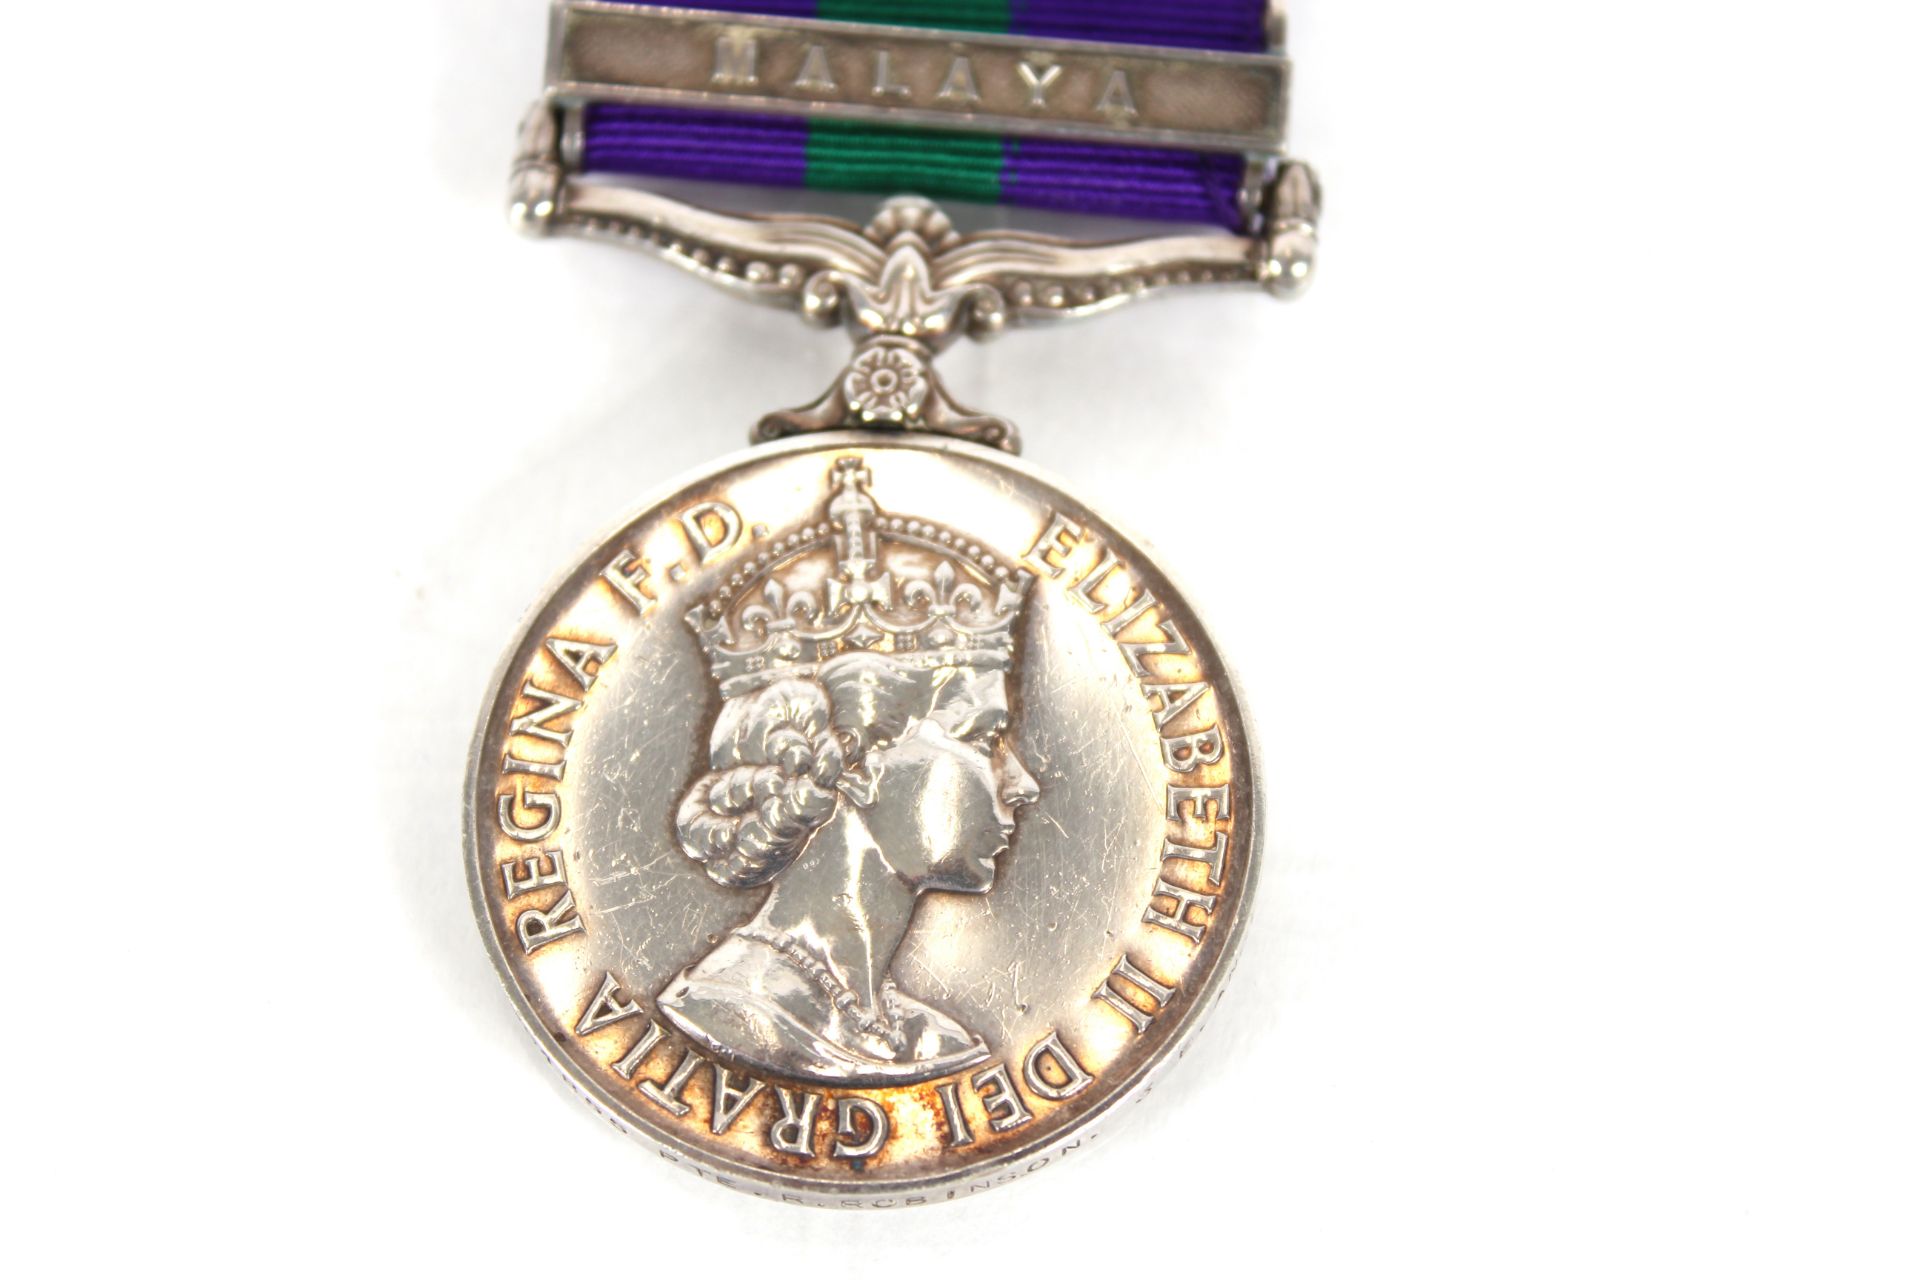 A QEII G.S.M. with Malaya clasp to 23661855 Pte. R - Image 2 of 4